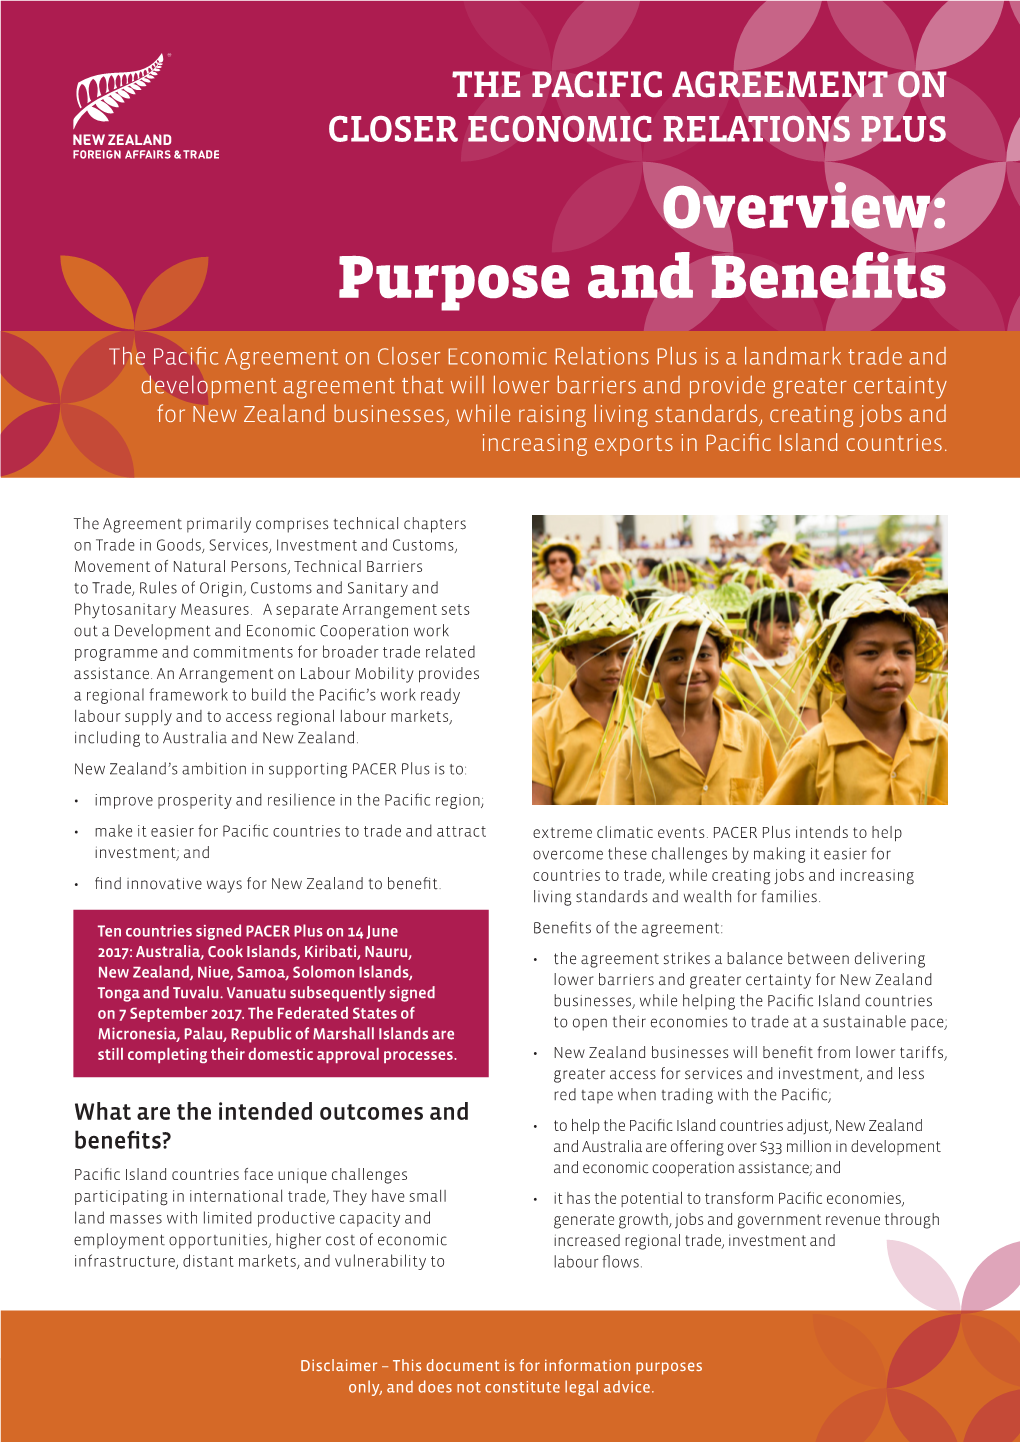 Overview: Purpose and Benefits